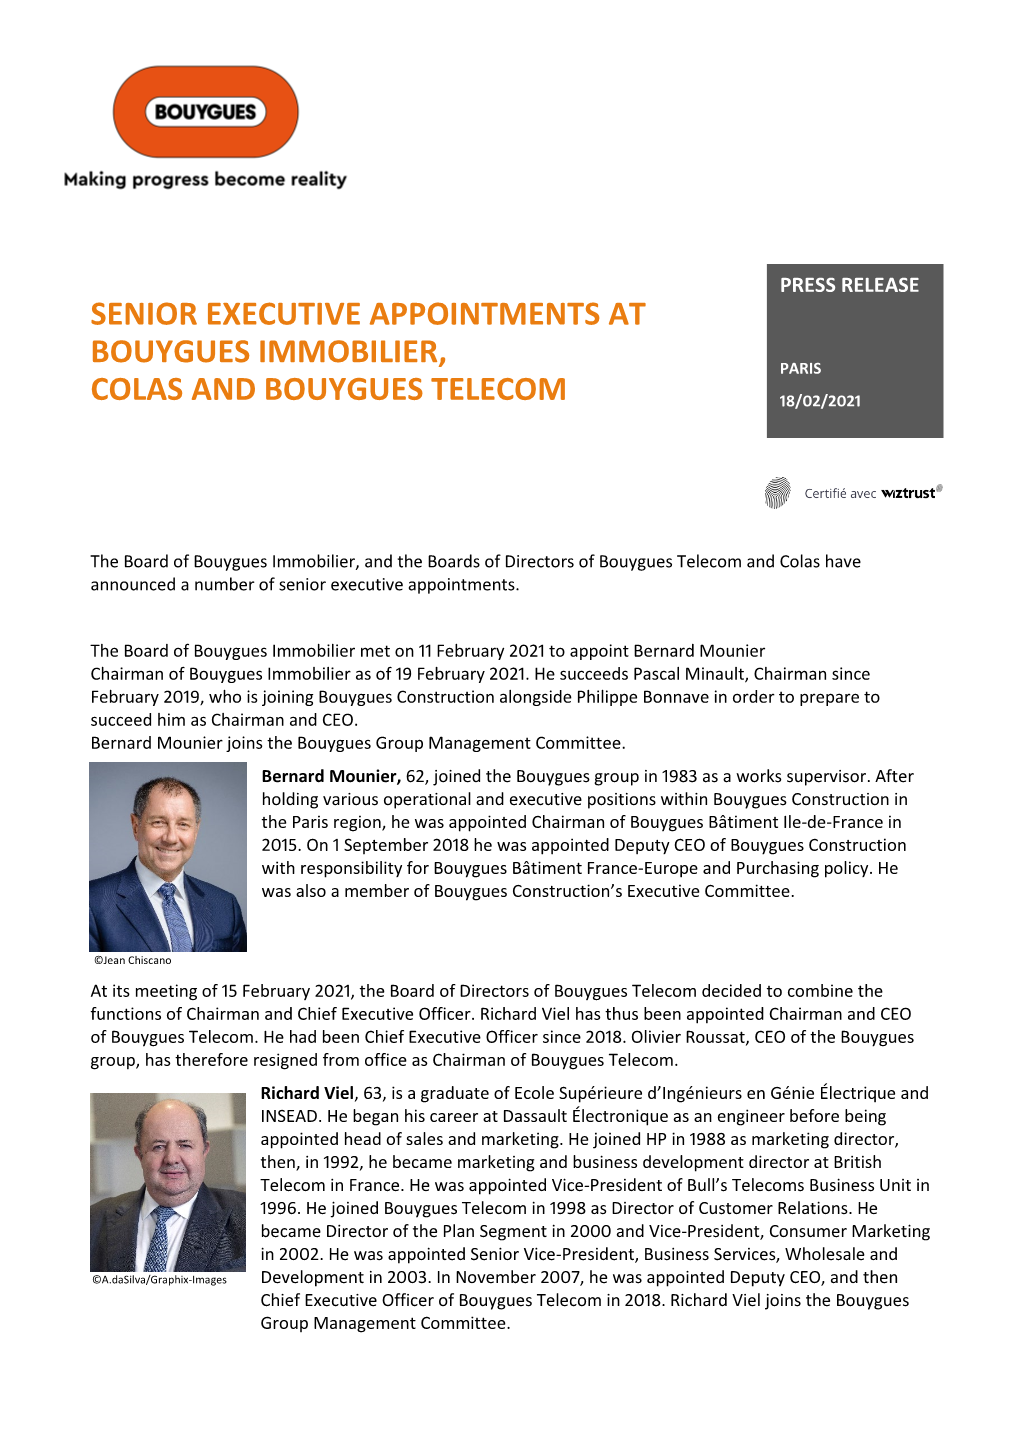 Senior Executive Appointments at Bouygues Immobilier, Colas and Bouygues Telecom